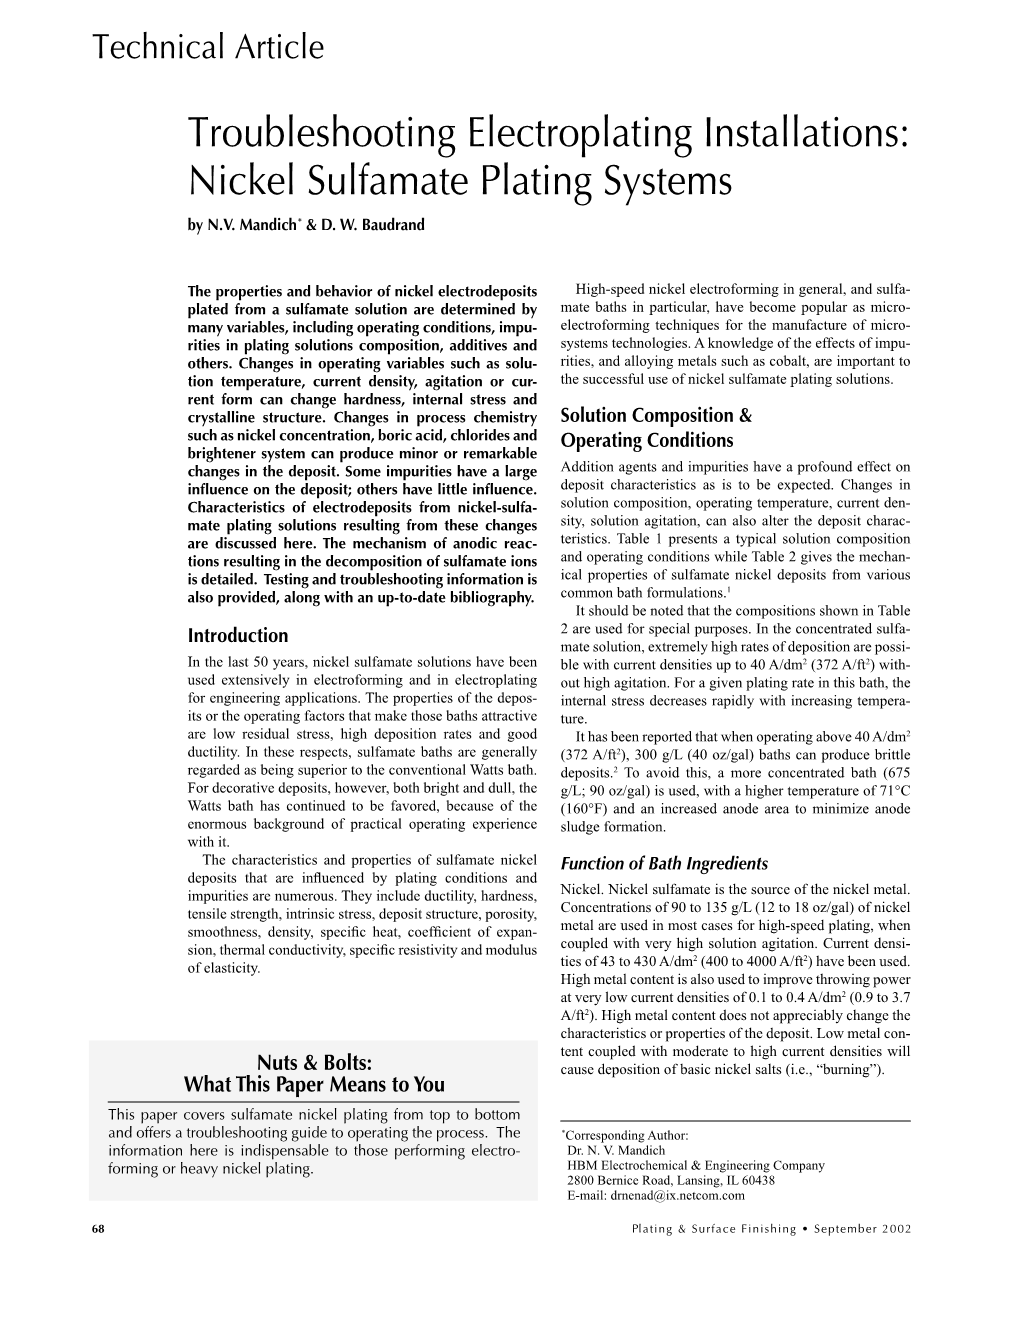 Troubleshooting Electroplating Installations: Nickel Sulfamate Plating Systems by N.V